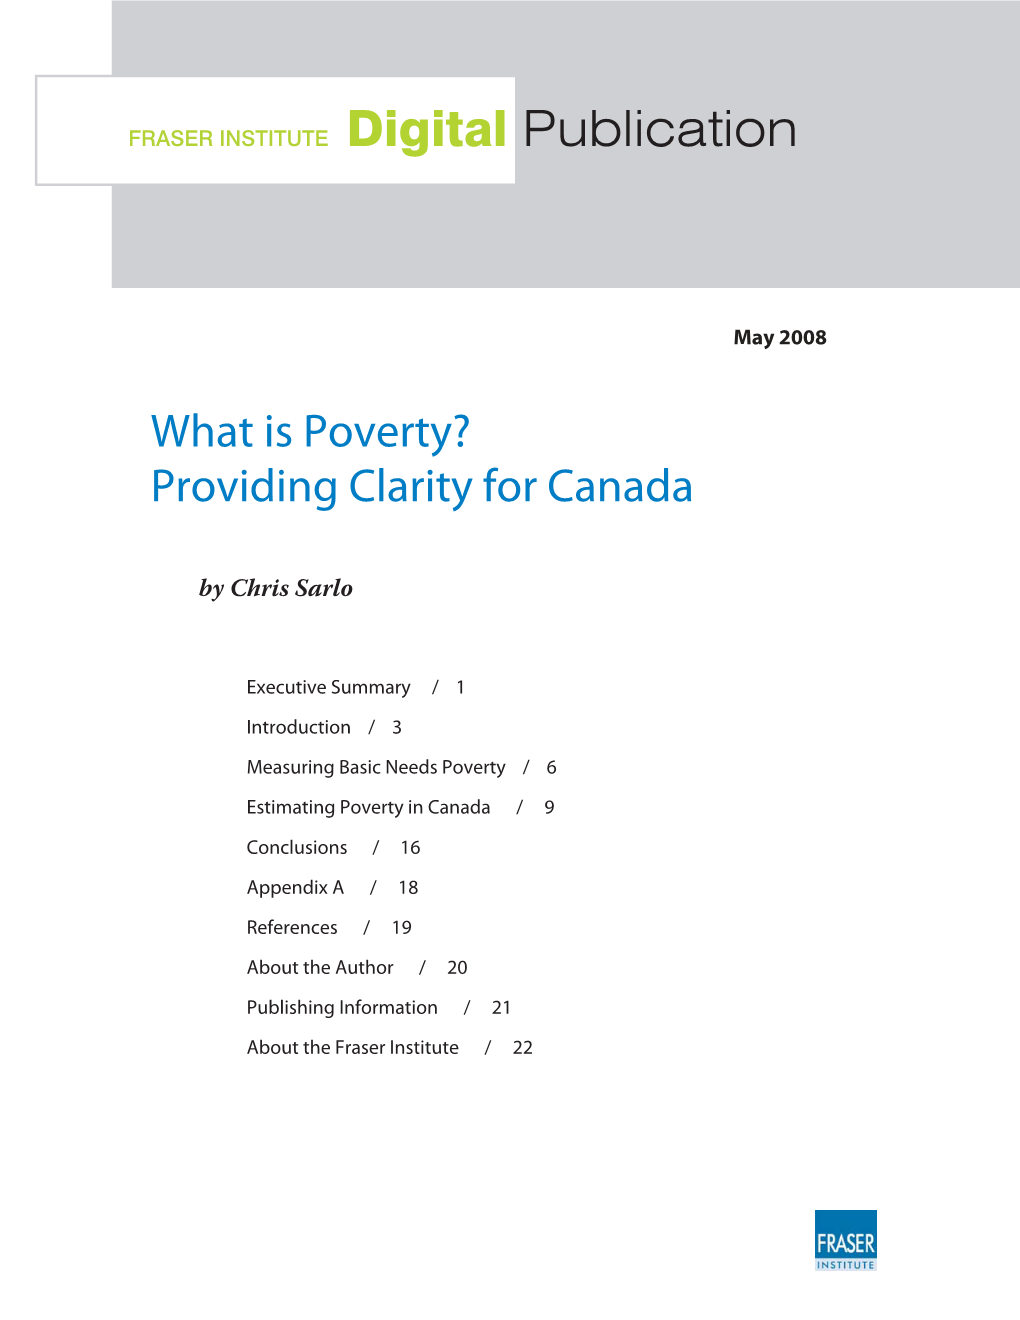 What Is Poverty? Providing Clarity for Canada